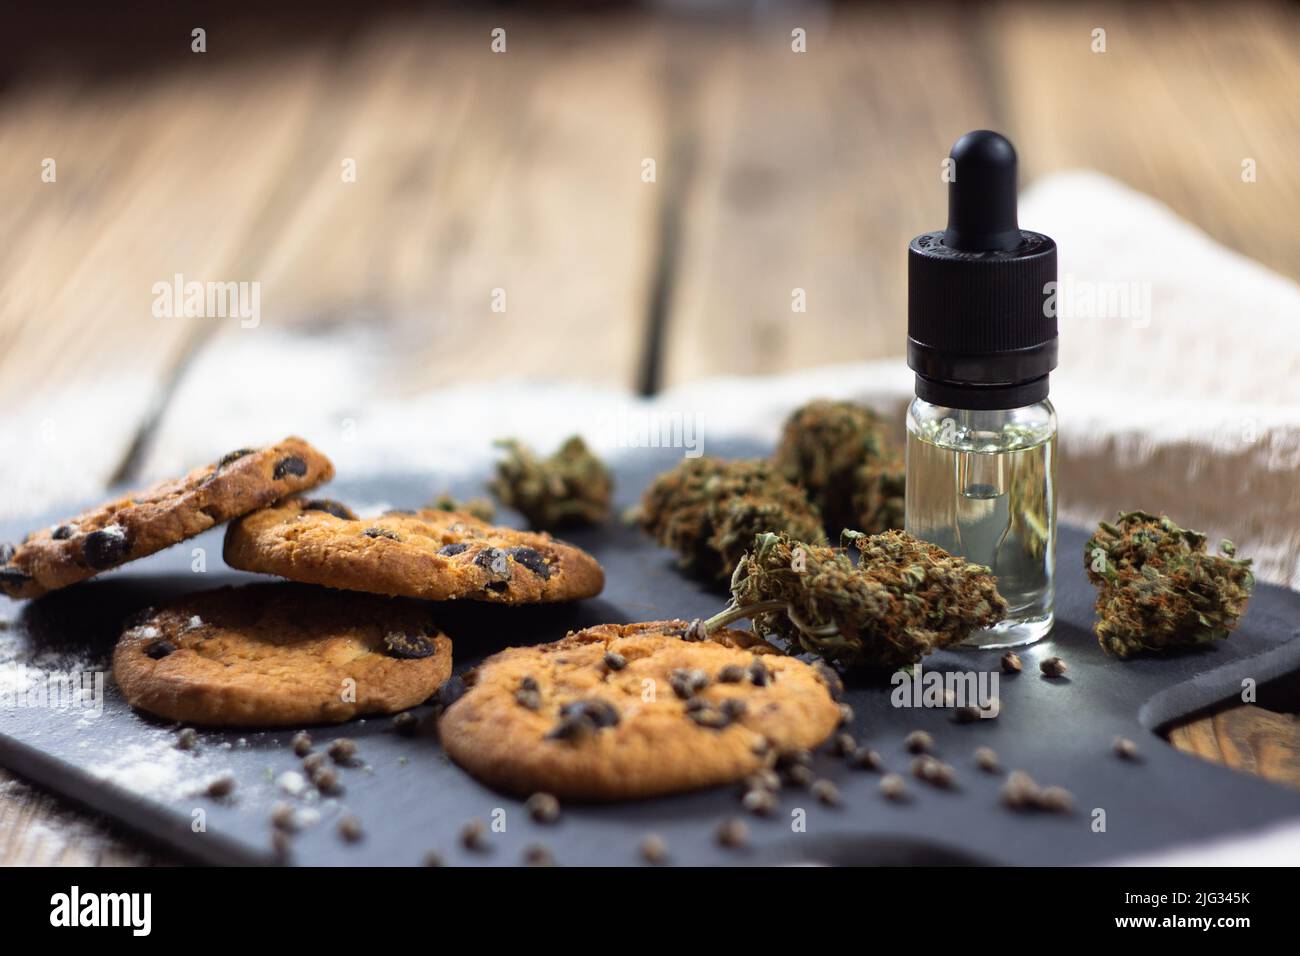 Homemade chocolate chip cookies with cbd oil, surrounded by dry cannabis buds, marijuana seeds and a glass bottle with a dropper of cbd oil. Stock Photo